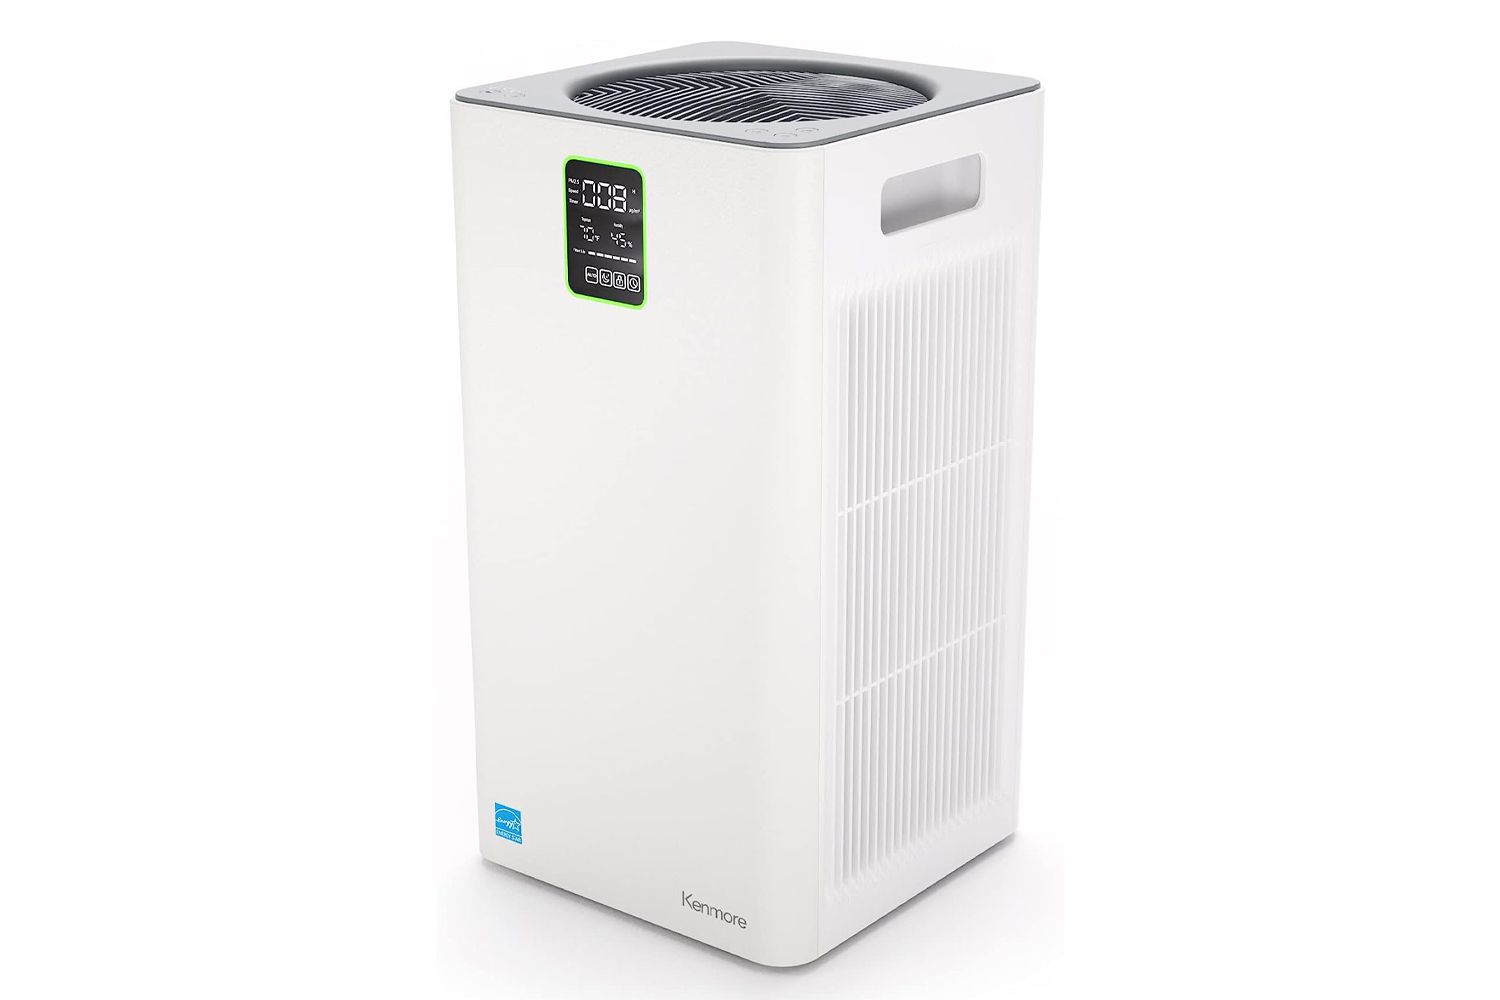 Amazon Kenmore 1500e Air Purifier with SilentClean HEPA Technology, Model PM3020